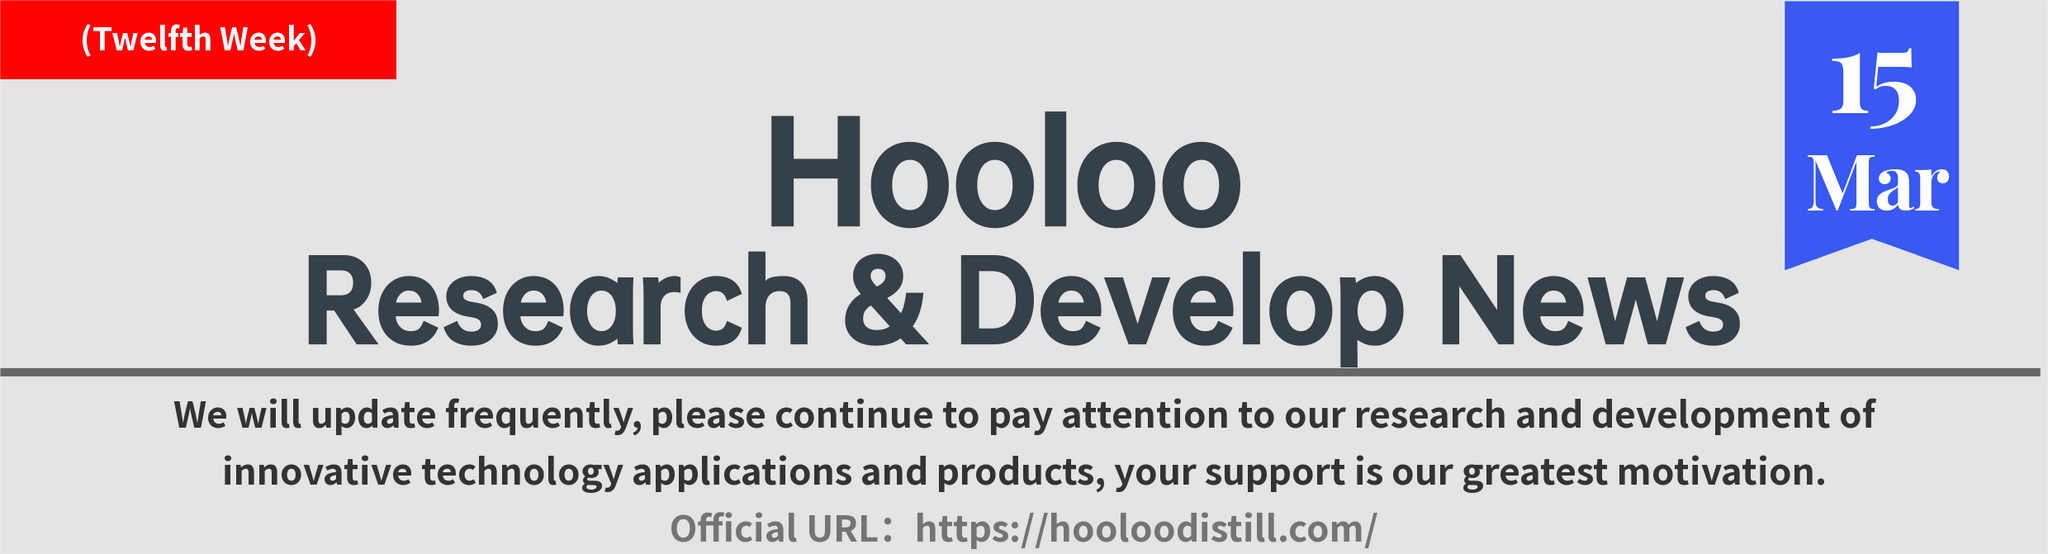 Hooloo Research & Develop News (issue 12)